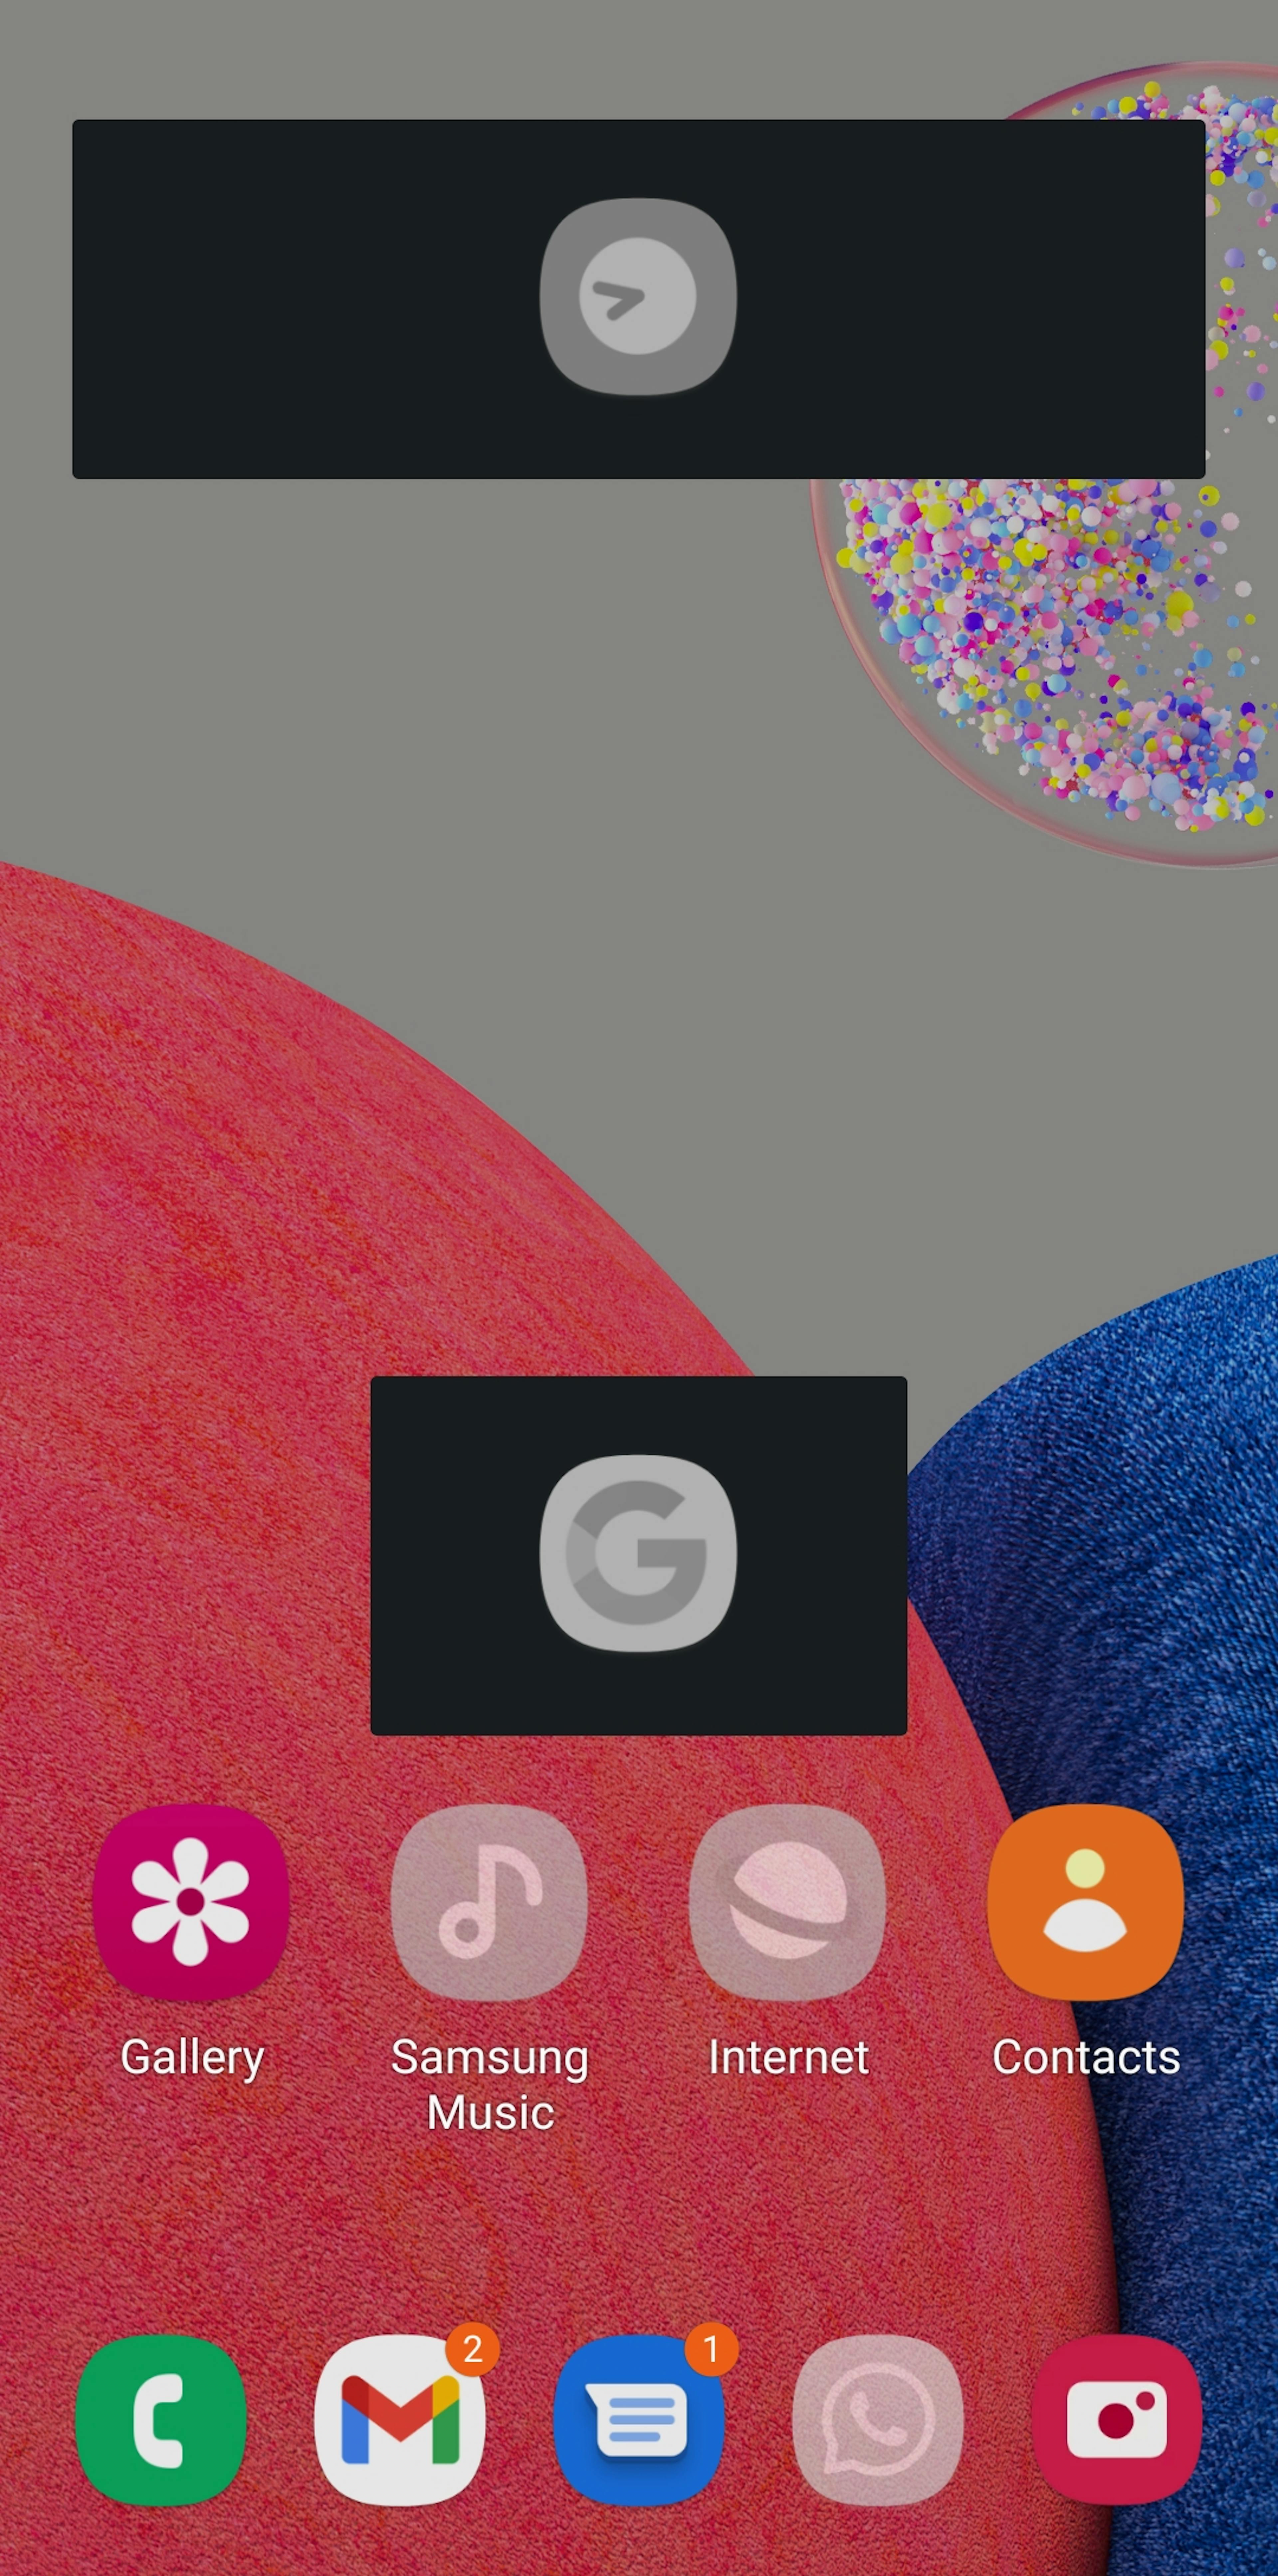 Systems apps appear in color while non-system apps appear as grey